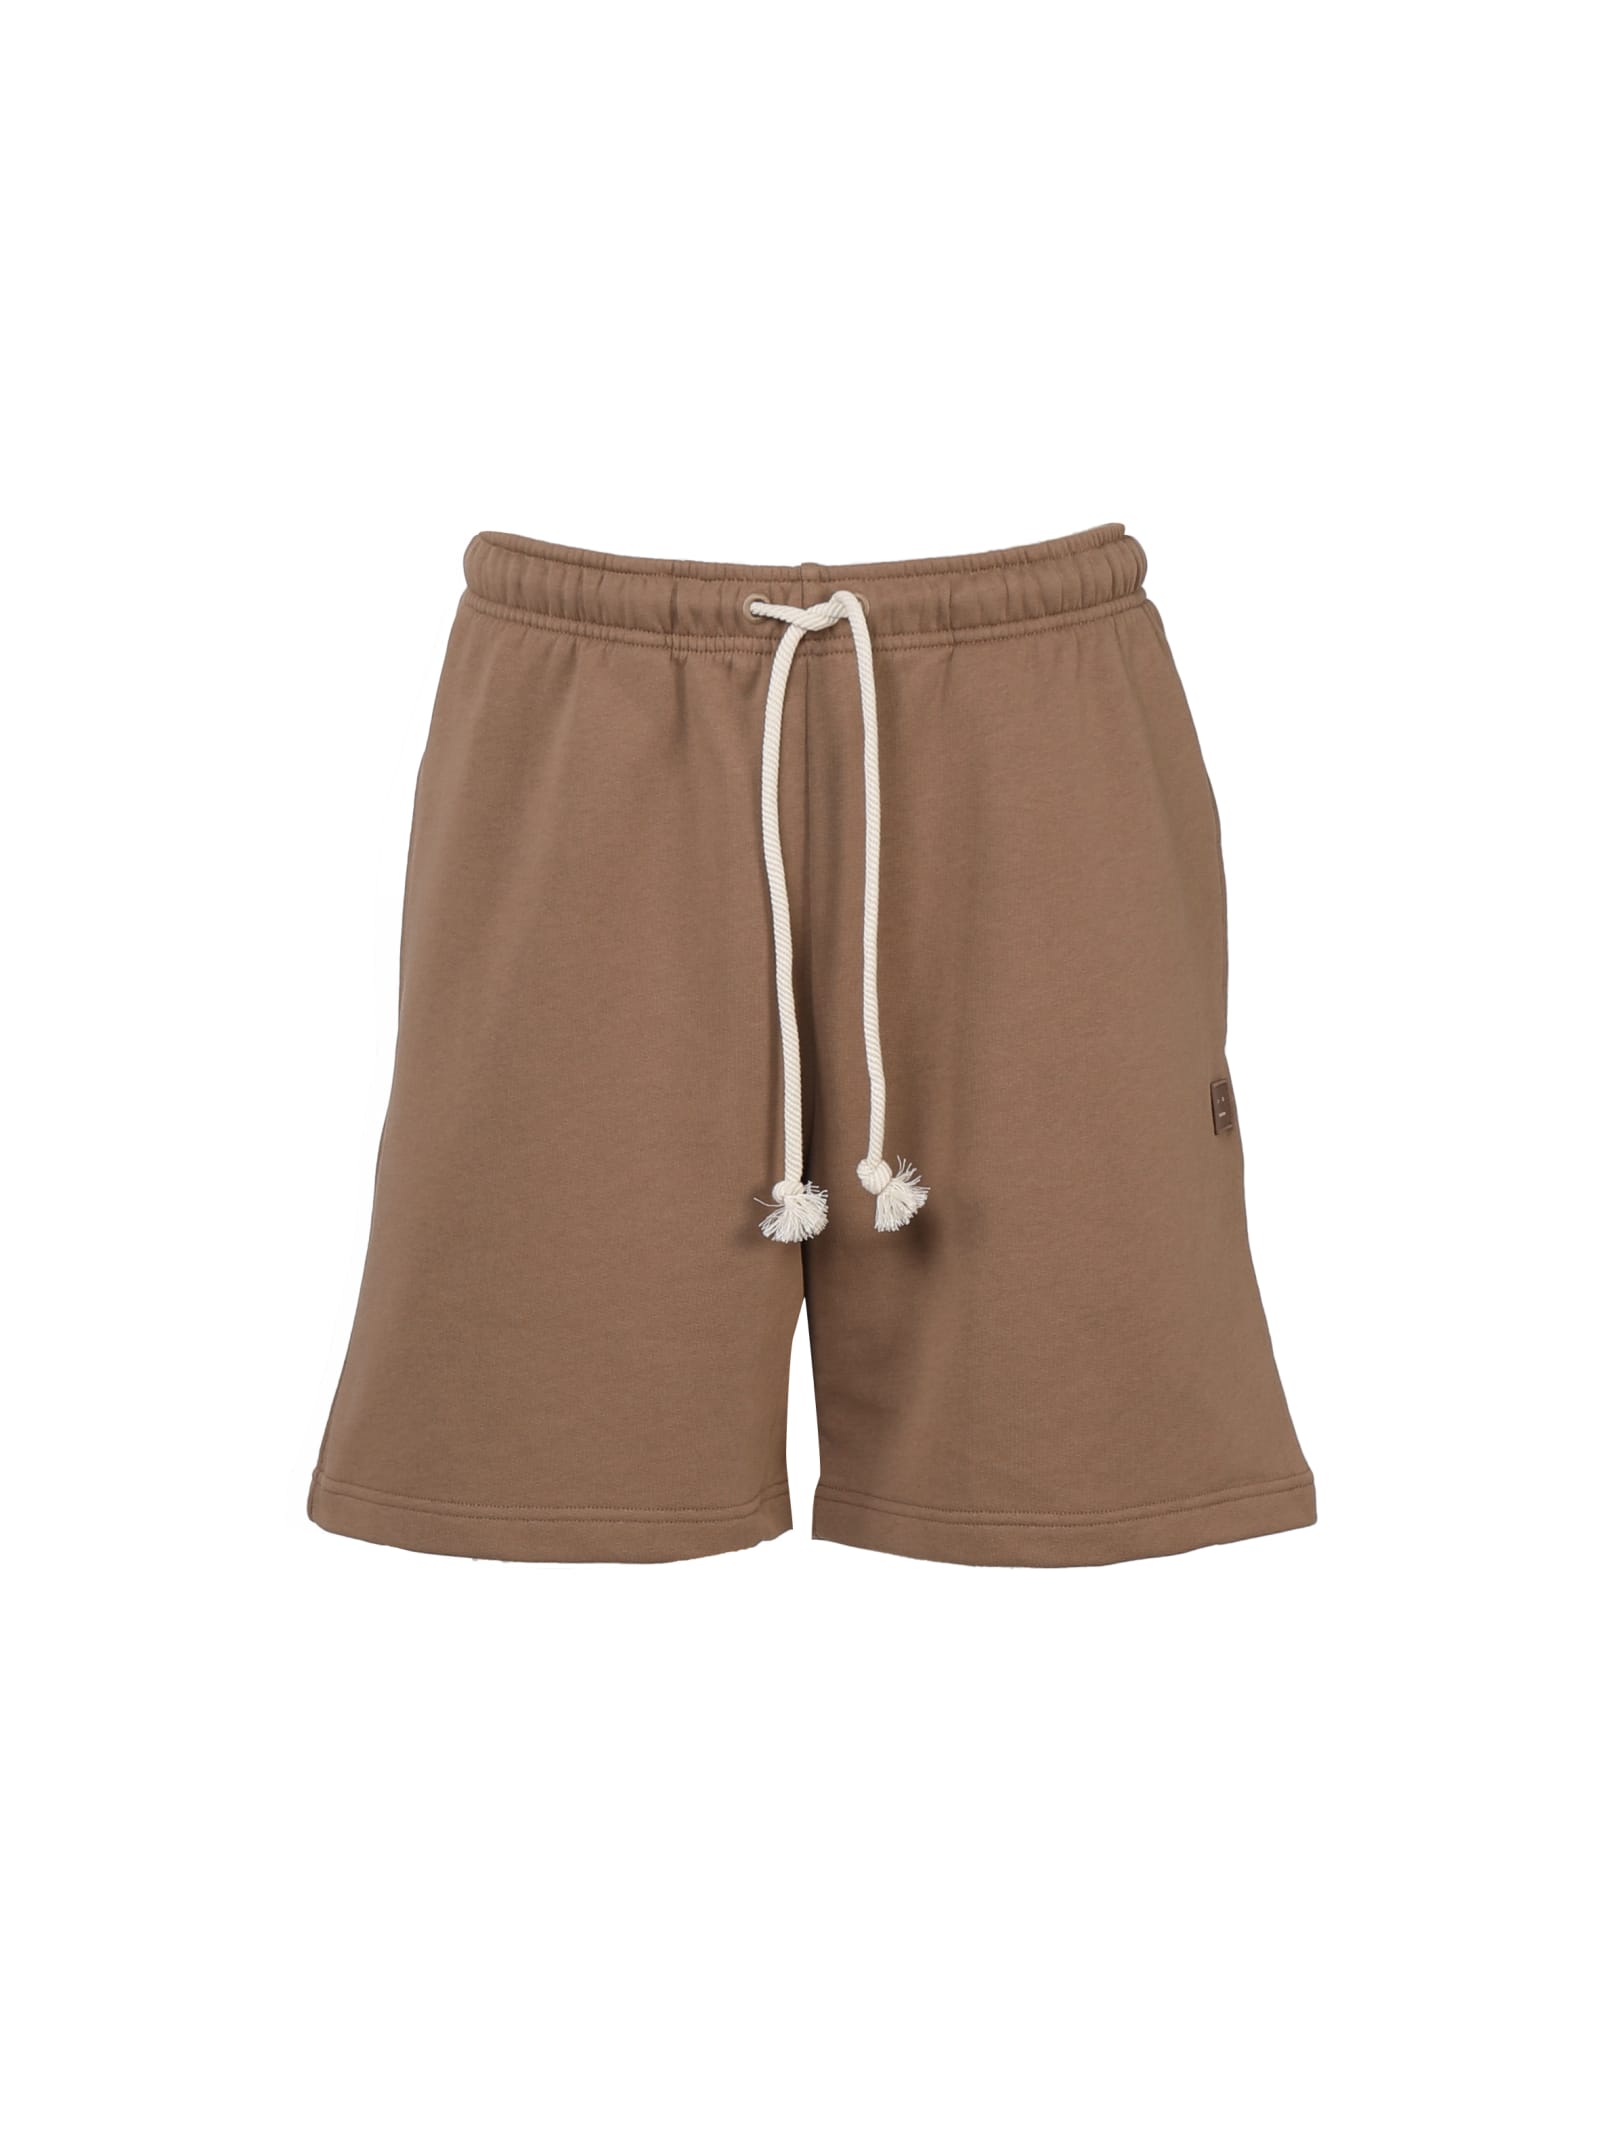 Acne Studios Cotton Shorts With Drawstrings